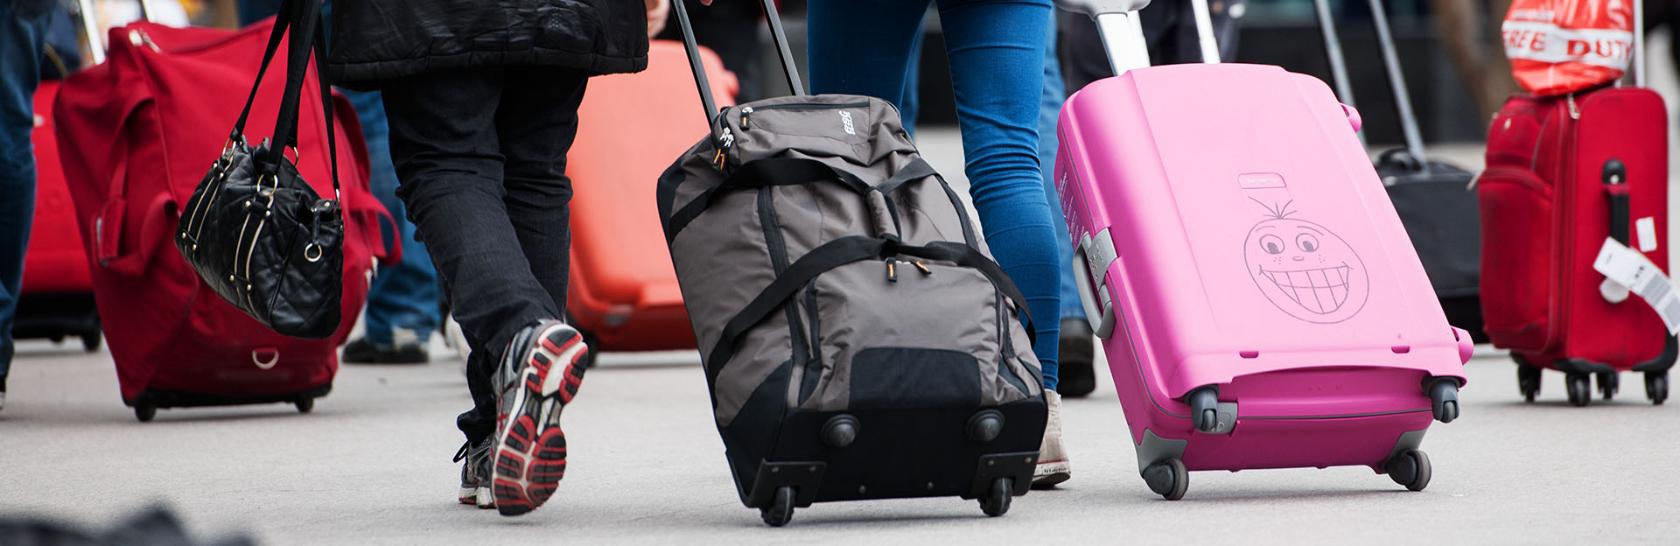 Ireland's first ever 'Lost Luggage Auction' to take place in Kildare next  week | JOE is the voice of Irish people at home and abroad